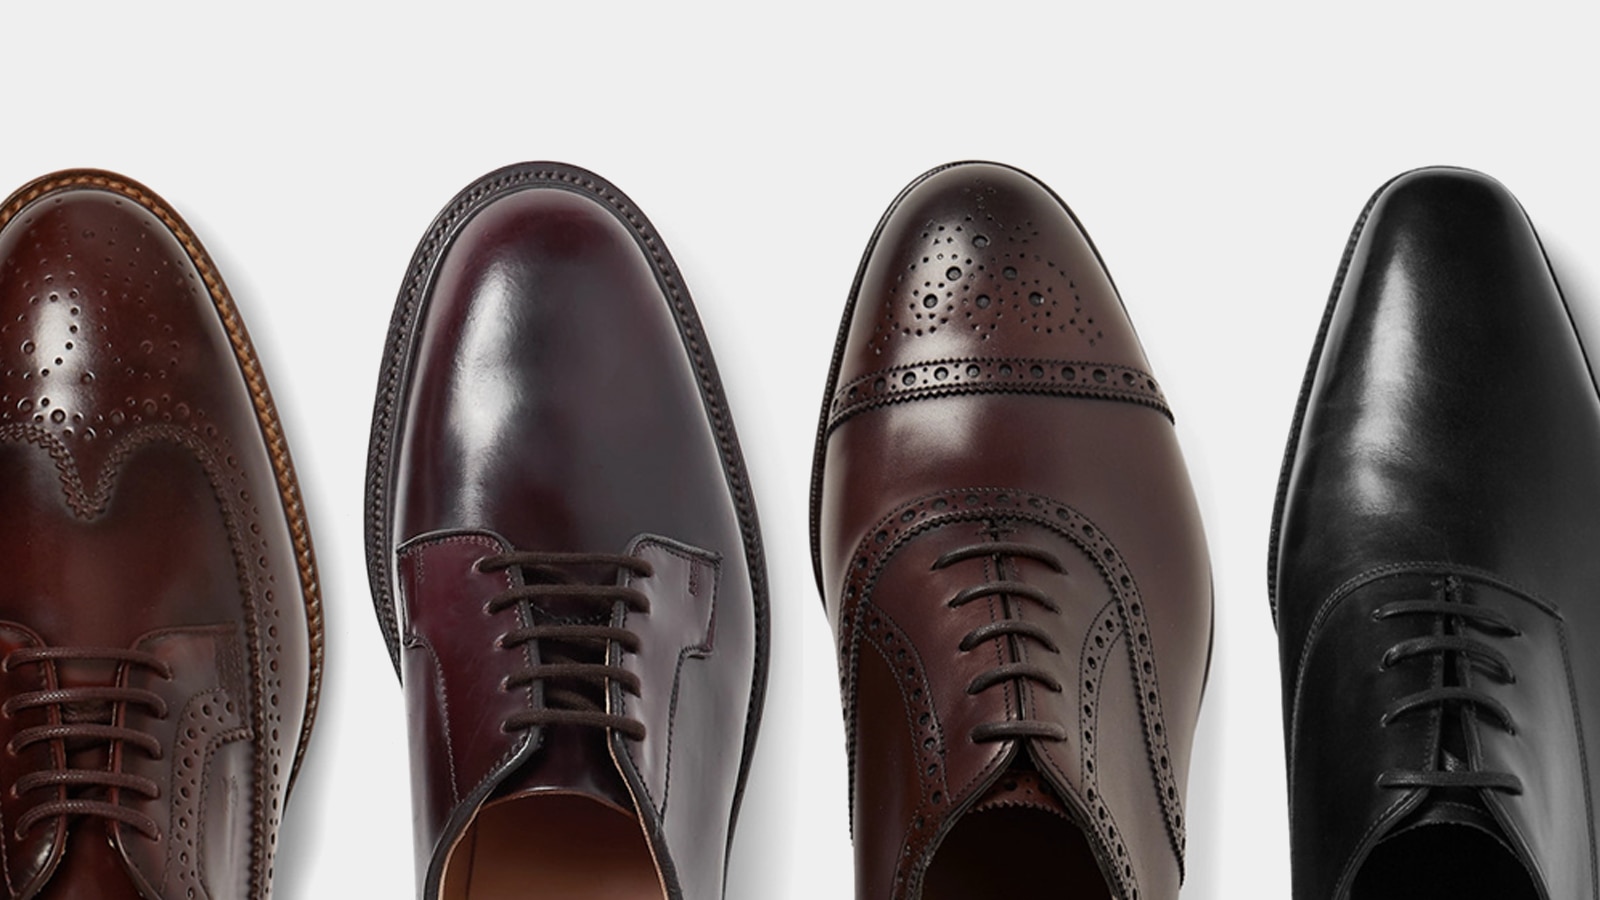 design your own dress shoes